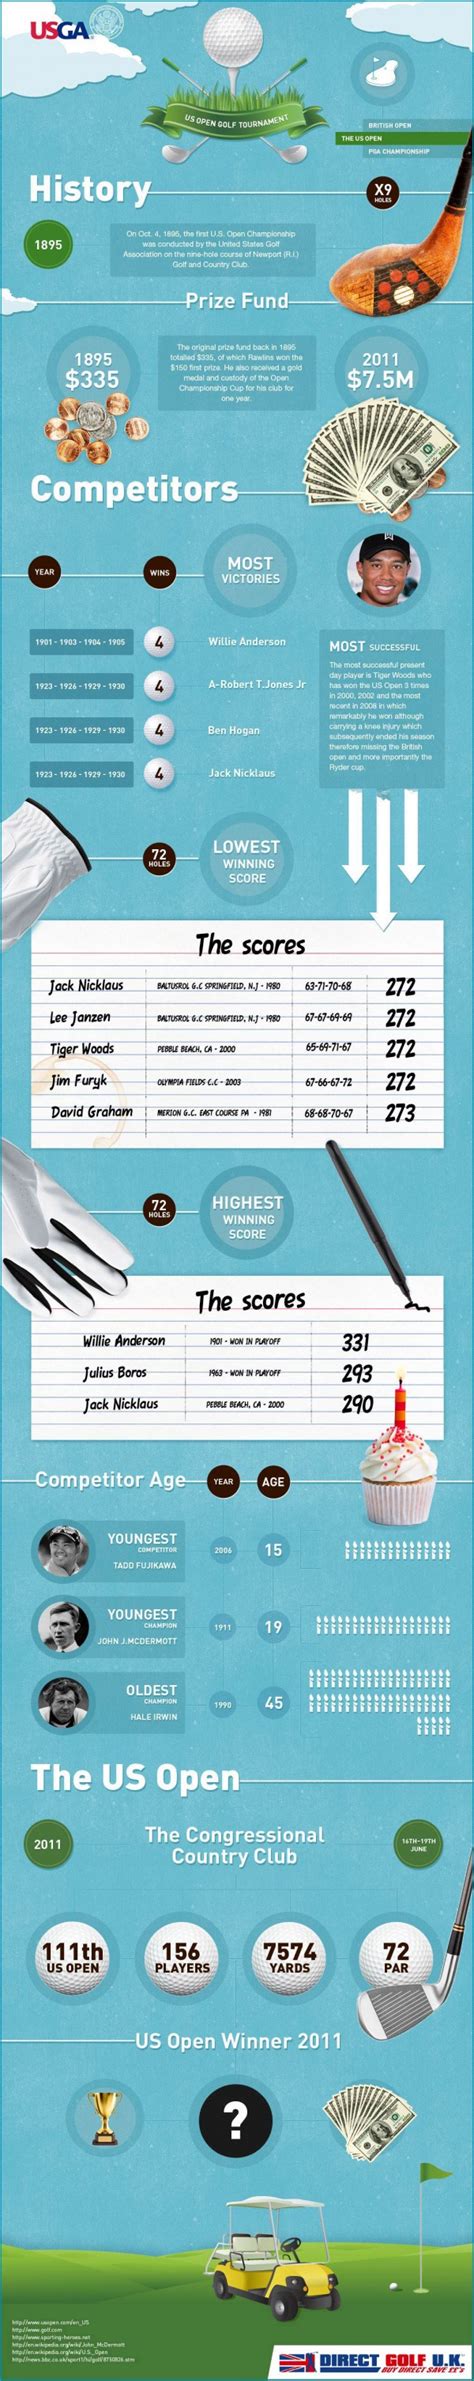 us open golf tournament [infographic] infographic list